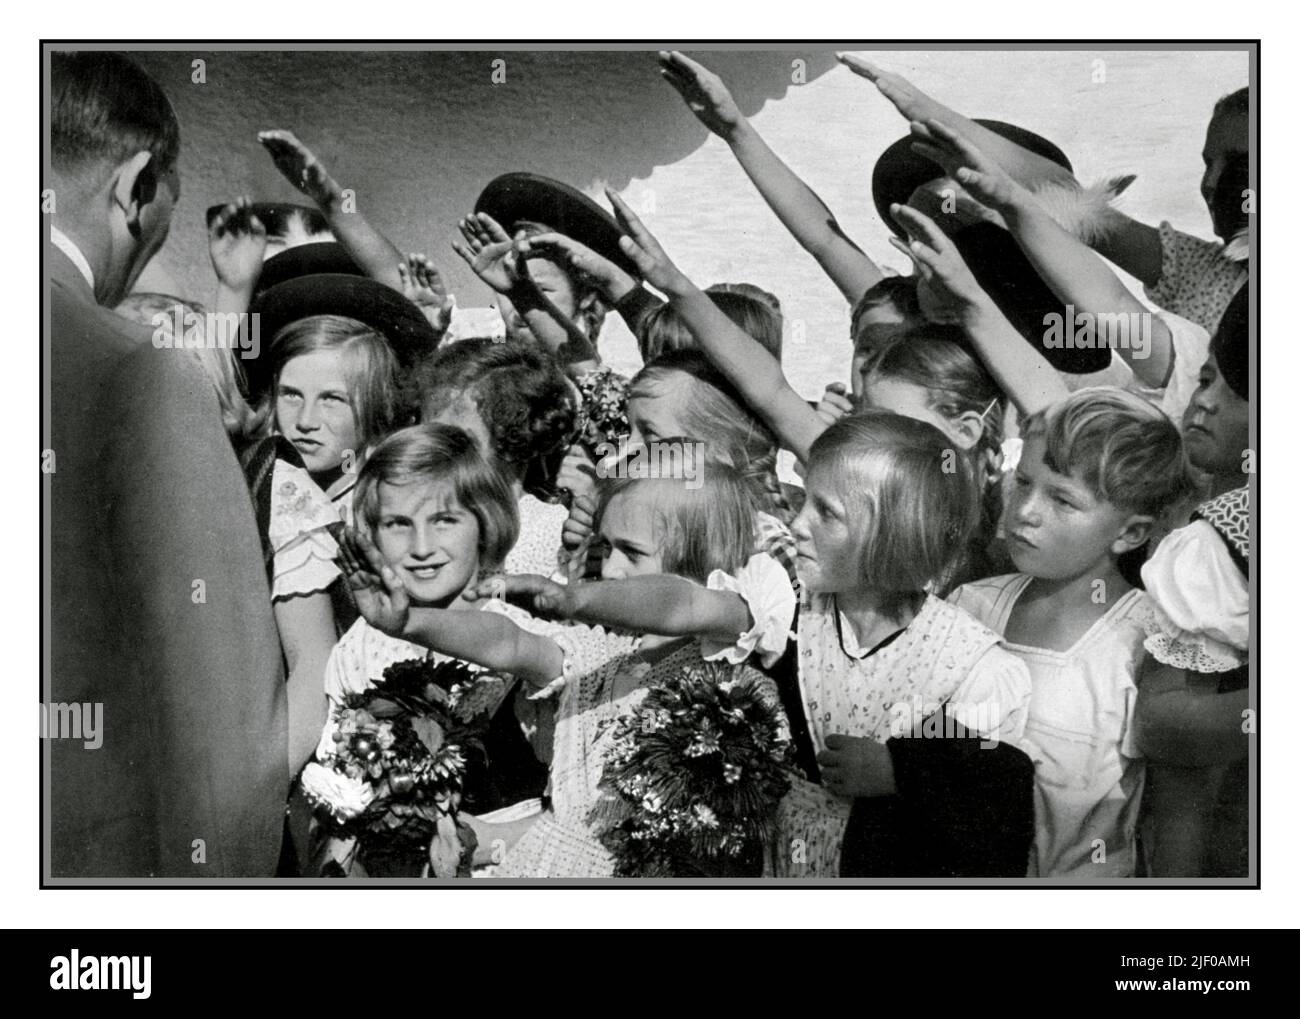 Adolf Hitler 1930s with group of happy young blond aryan girls and boys infants children with flowers, who are smiling and greeting him with the Nazi Heil Hitler salute. Nazi Germany 1936 Stock Photo